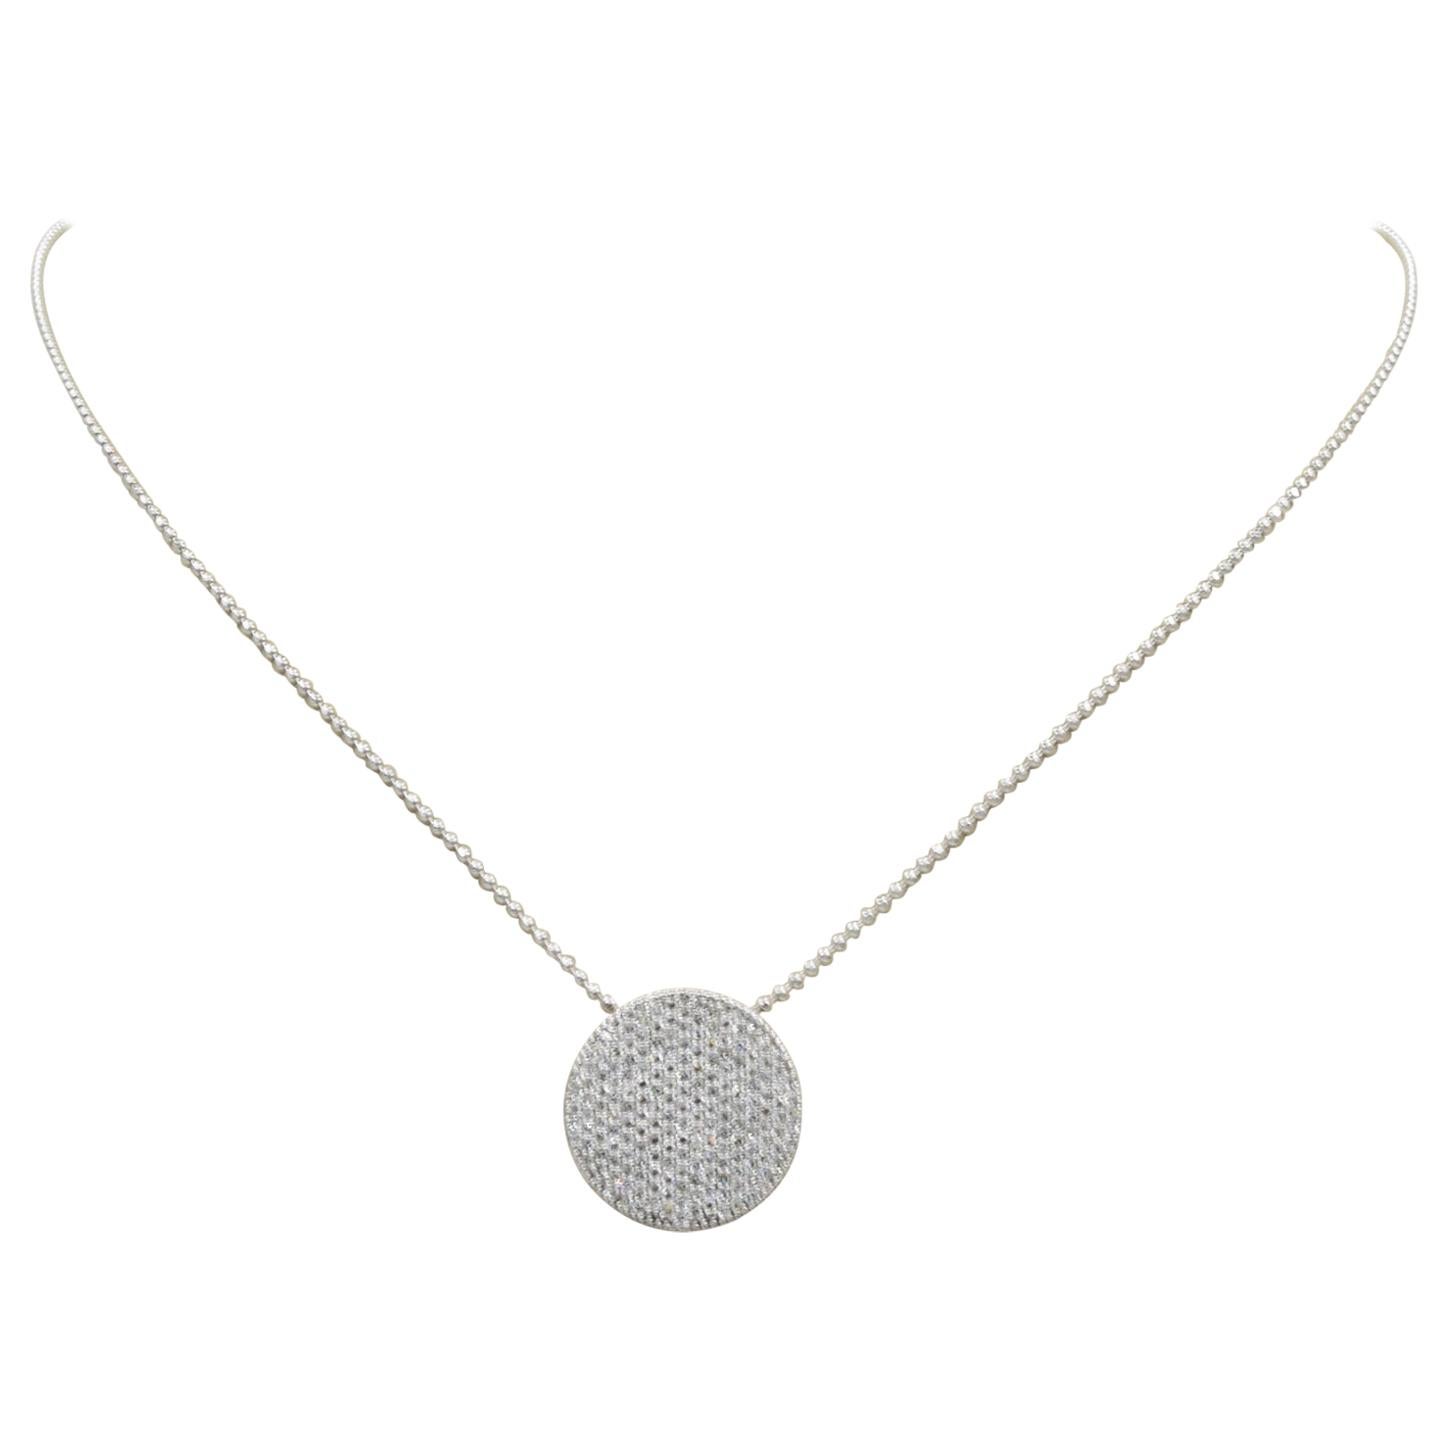 Phillips House Large Infinity Necklace N20223PDW 1.00 Carat Diamond Disc For Sale